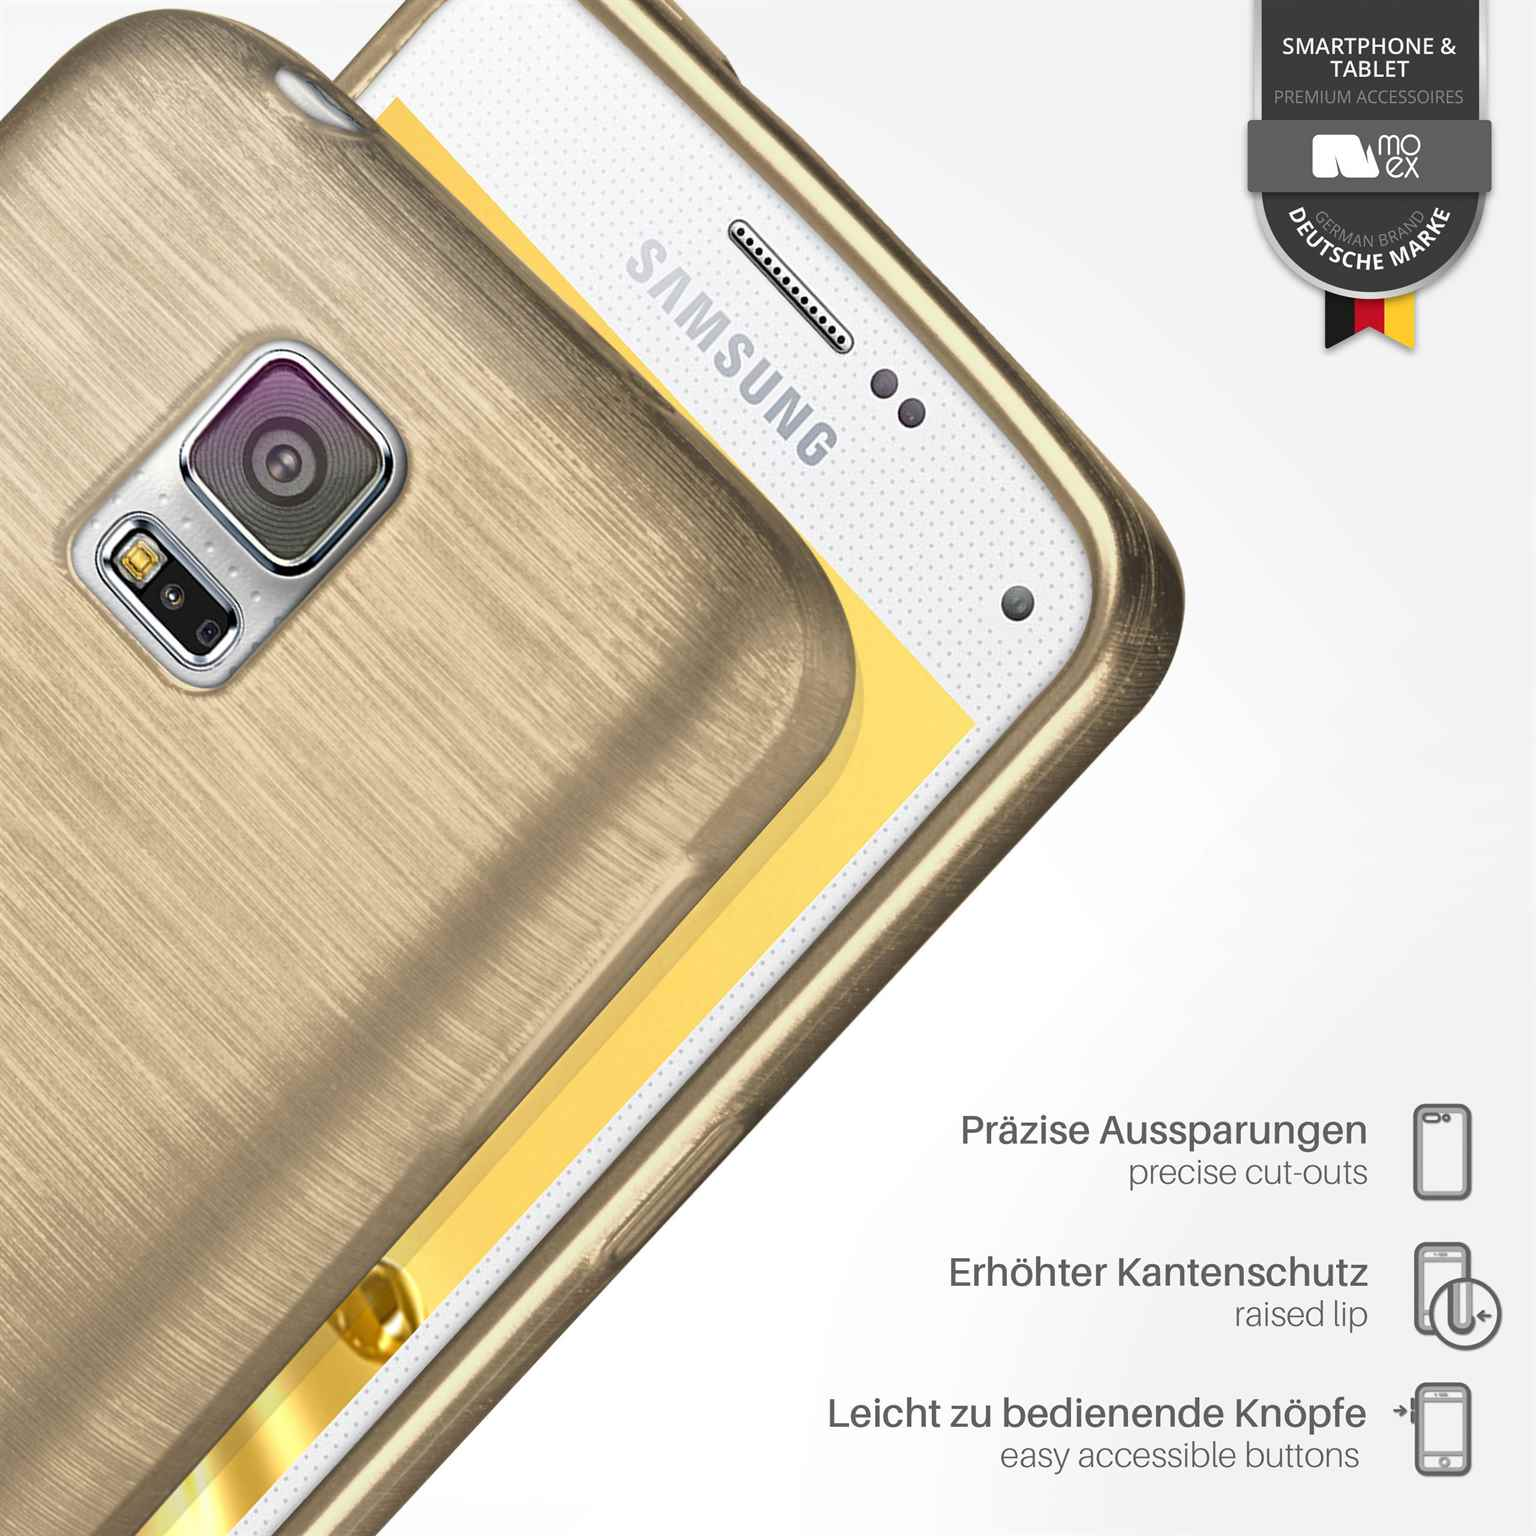 MOEX Brushed Case, Backcover, Samsung, Ivory-Gold Galaxy S5